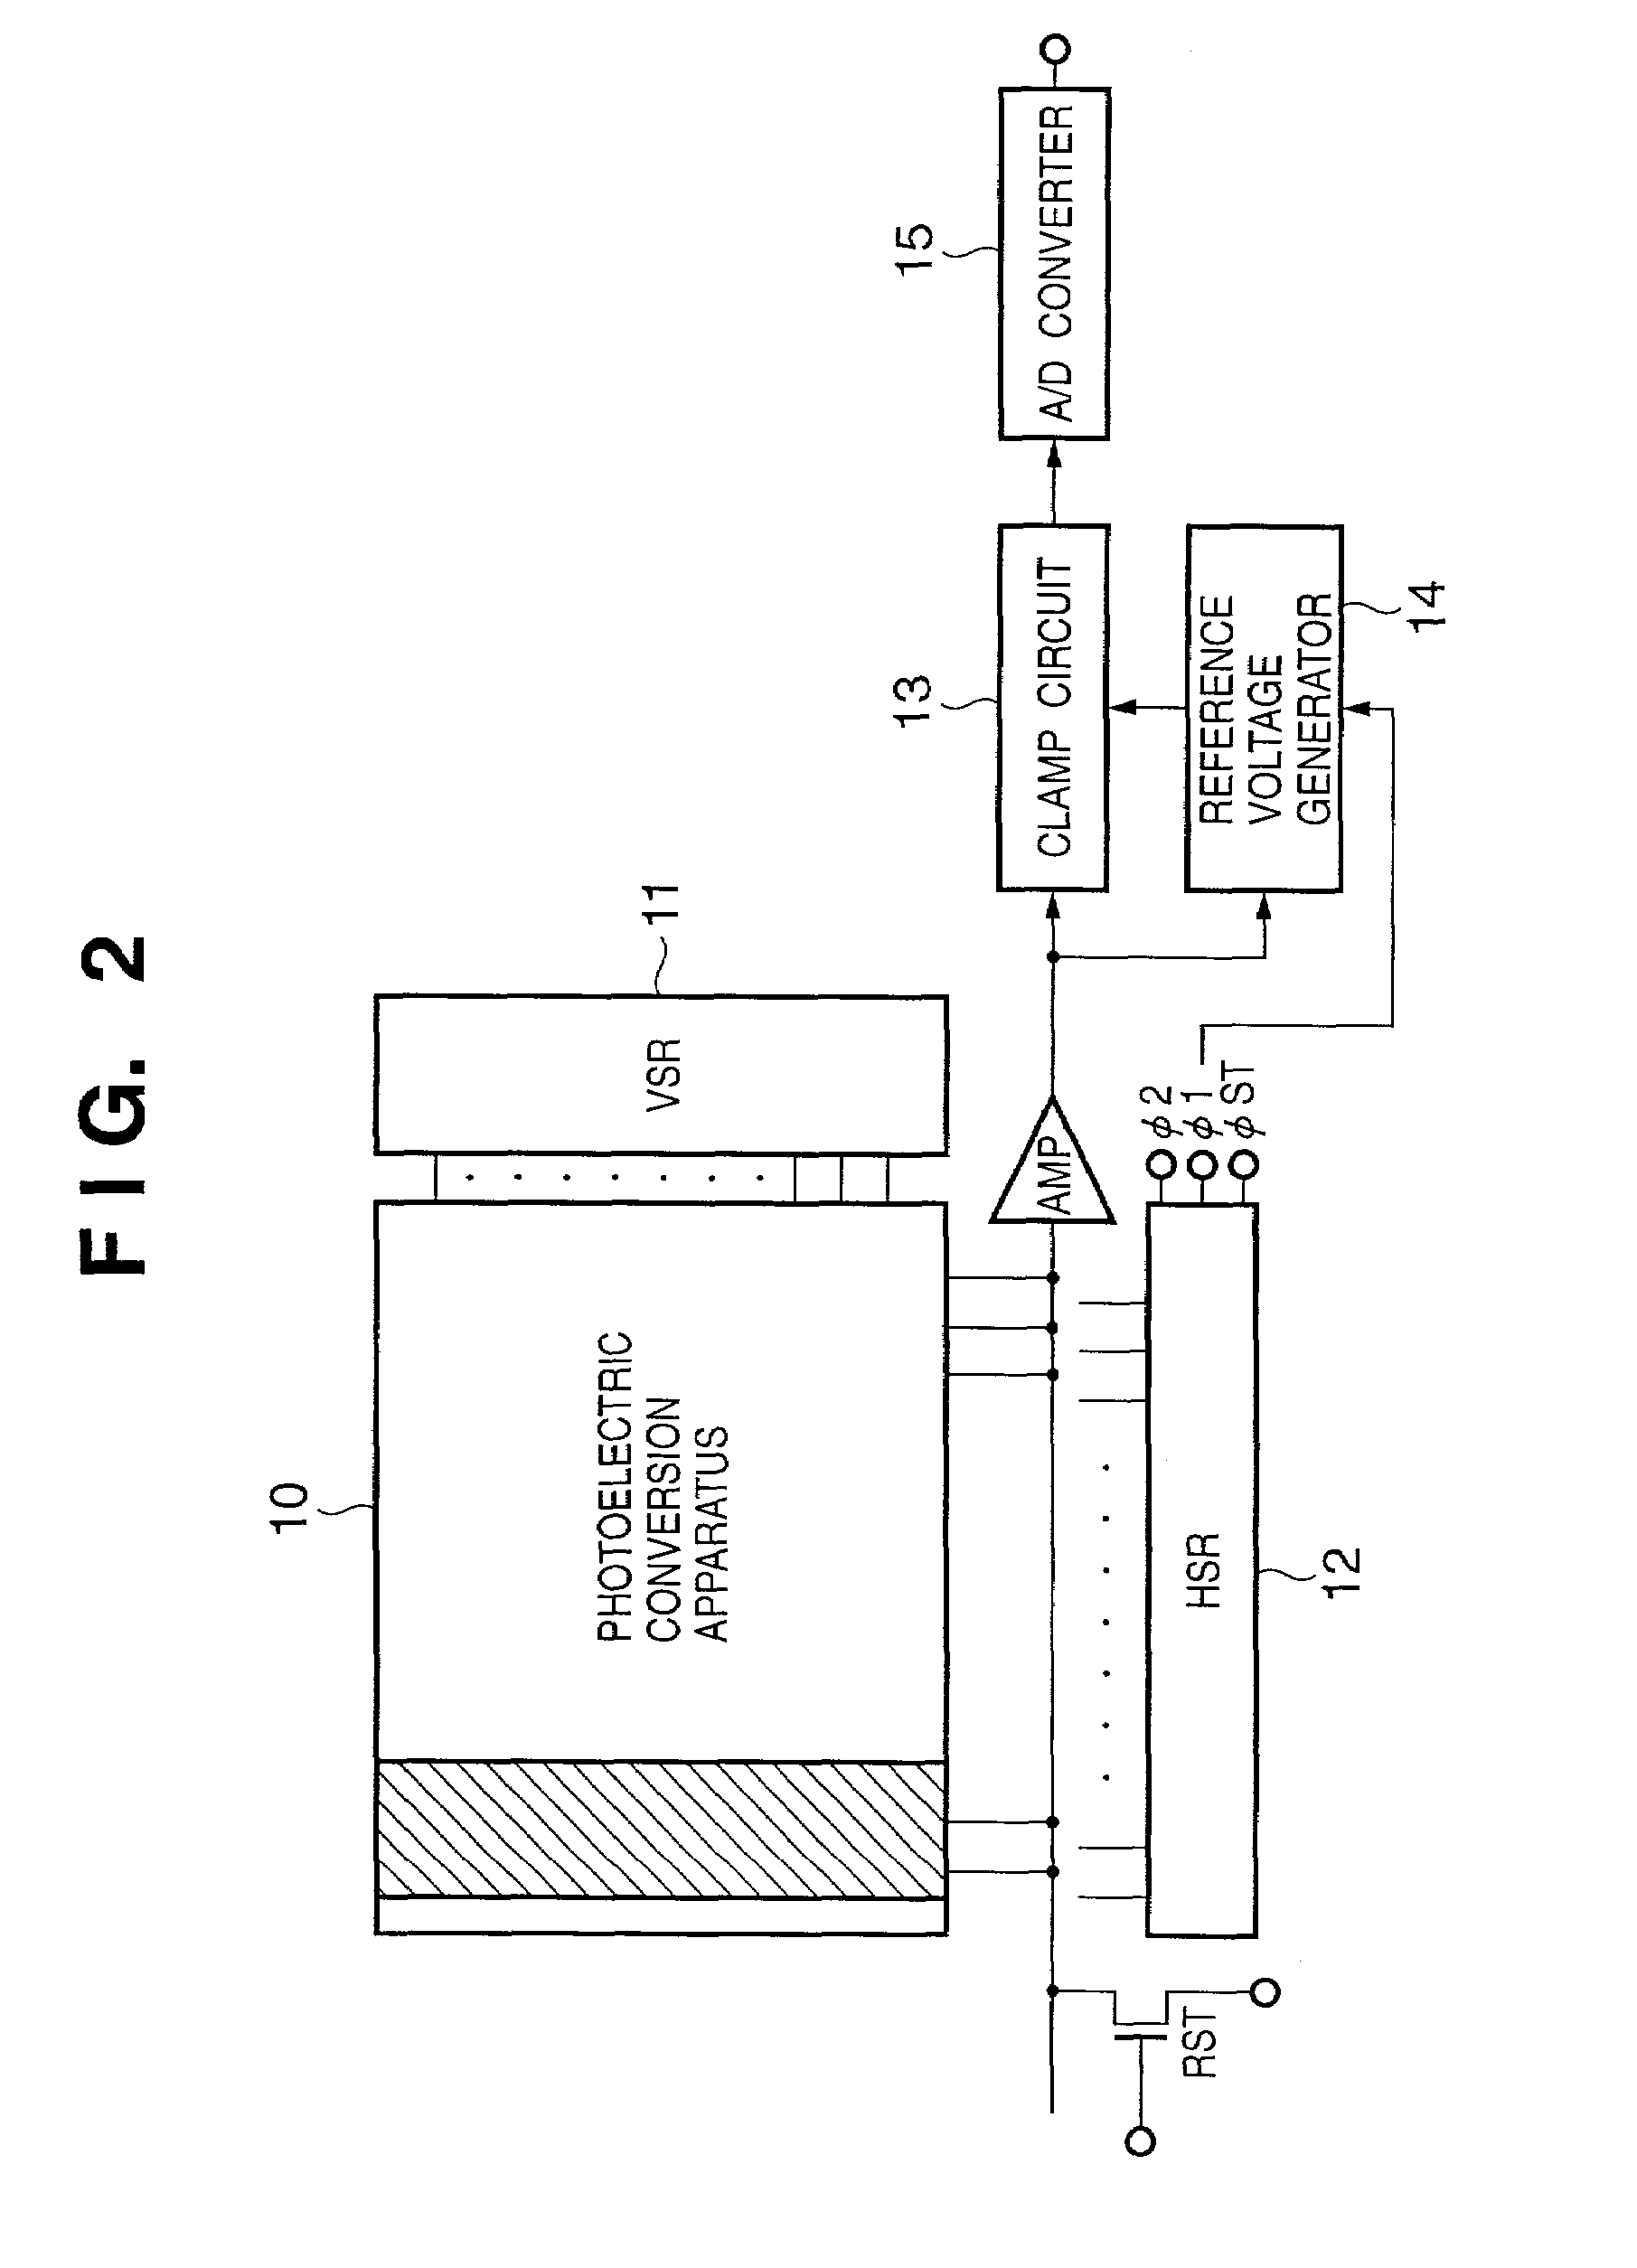 Dynamically reconfigurable signal processing circuit, pattern recognition apparatus, and image processing apparatus